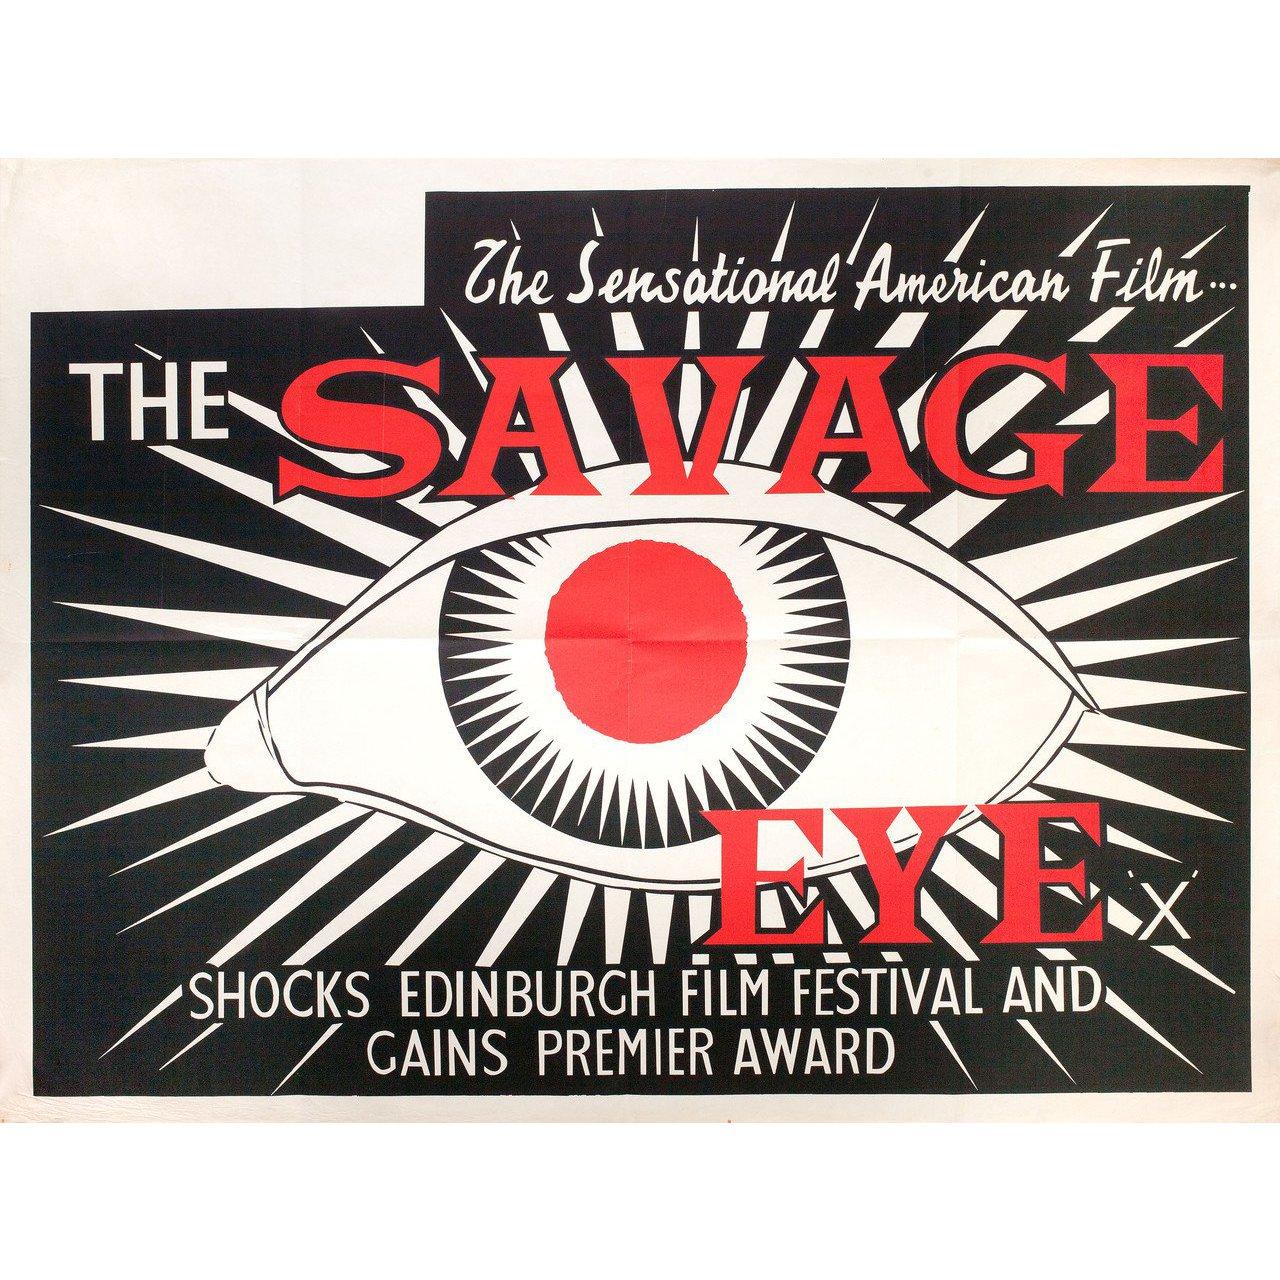 Original 1960 British quad poster for. Very good-fine condition, folded. Many original posters were issued folded or were subsequently folded. Please note: the size is stated in inches and the actual size can vary by an inch or more.
 